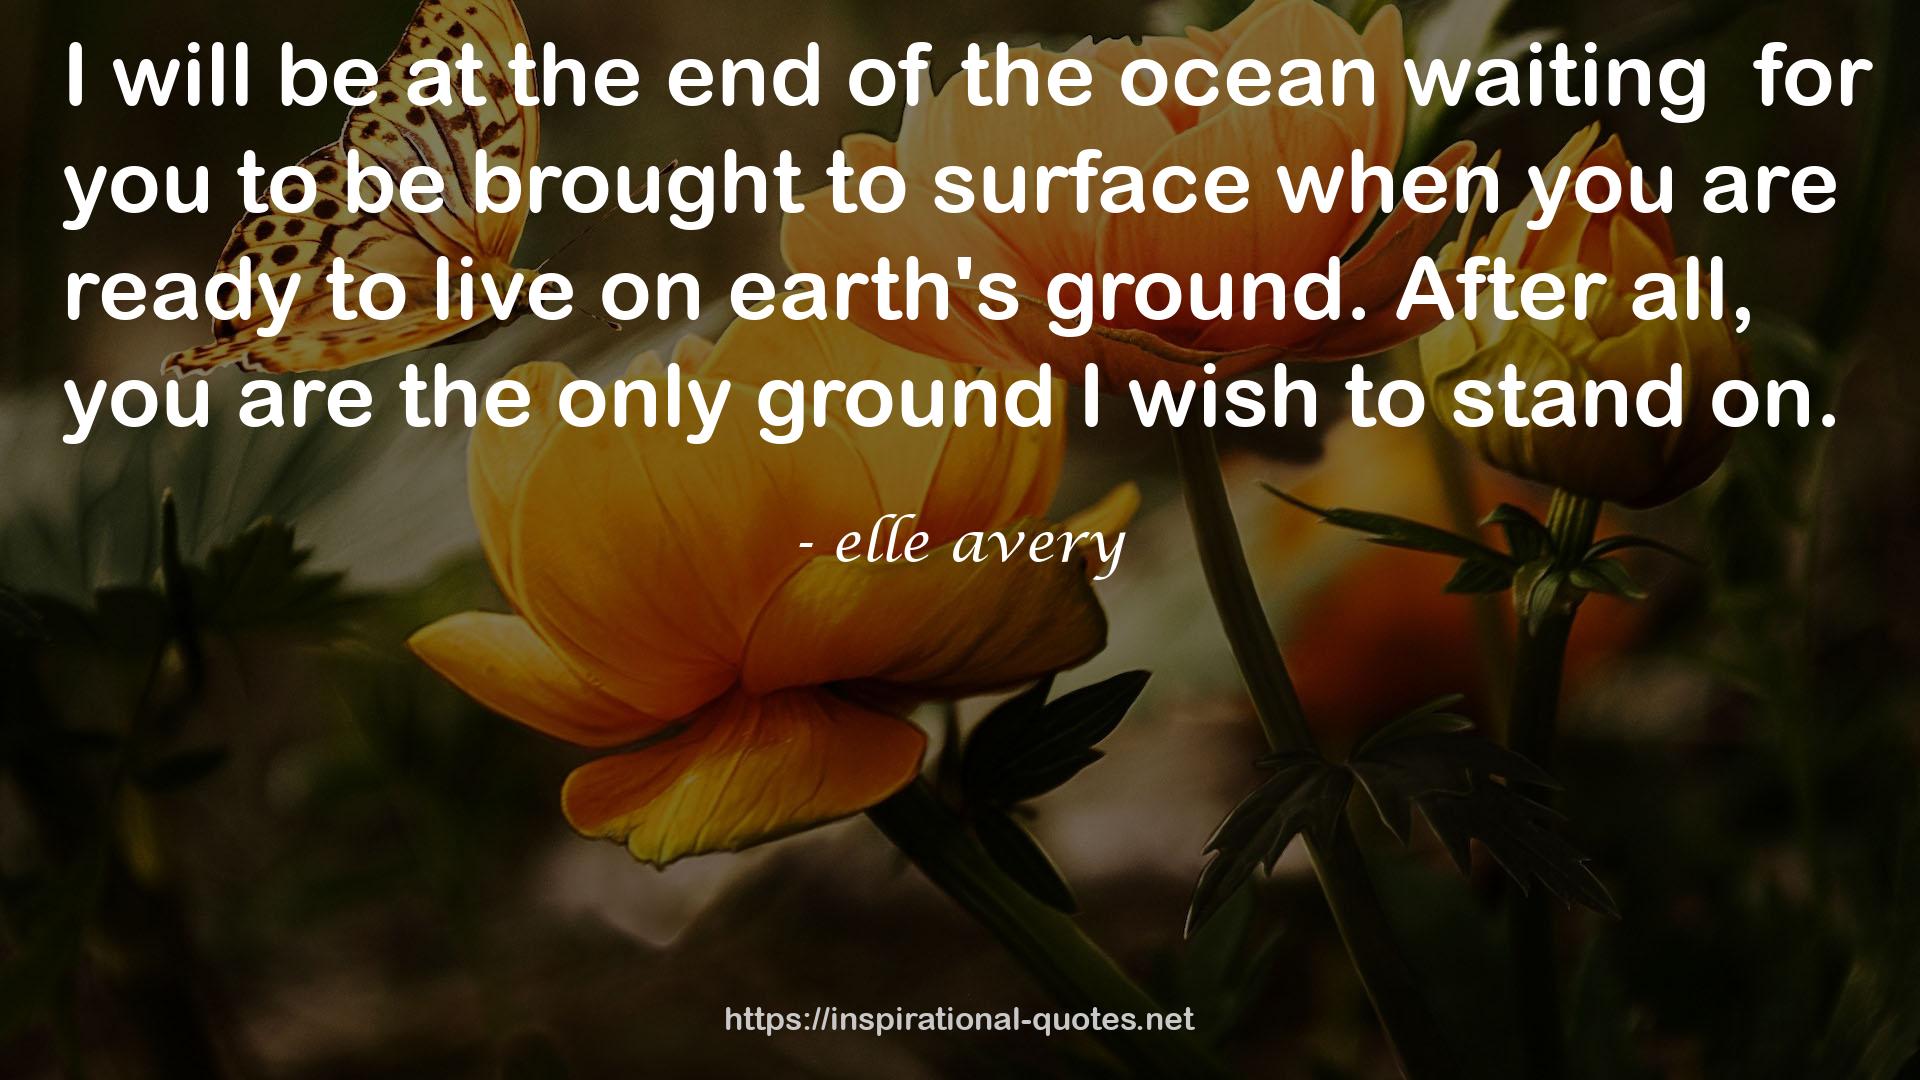 elle avery QUOTES